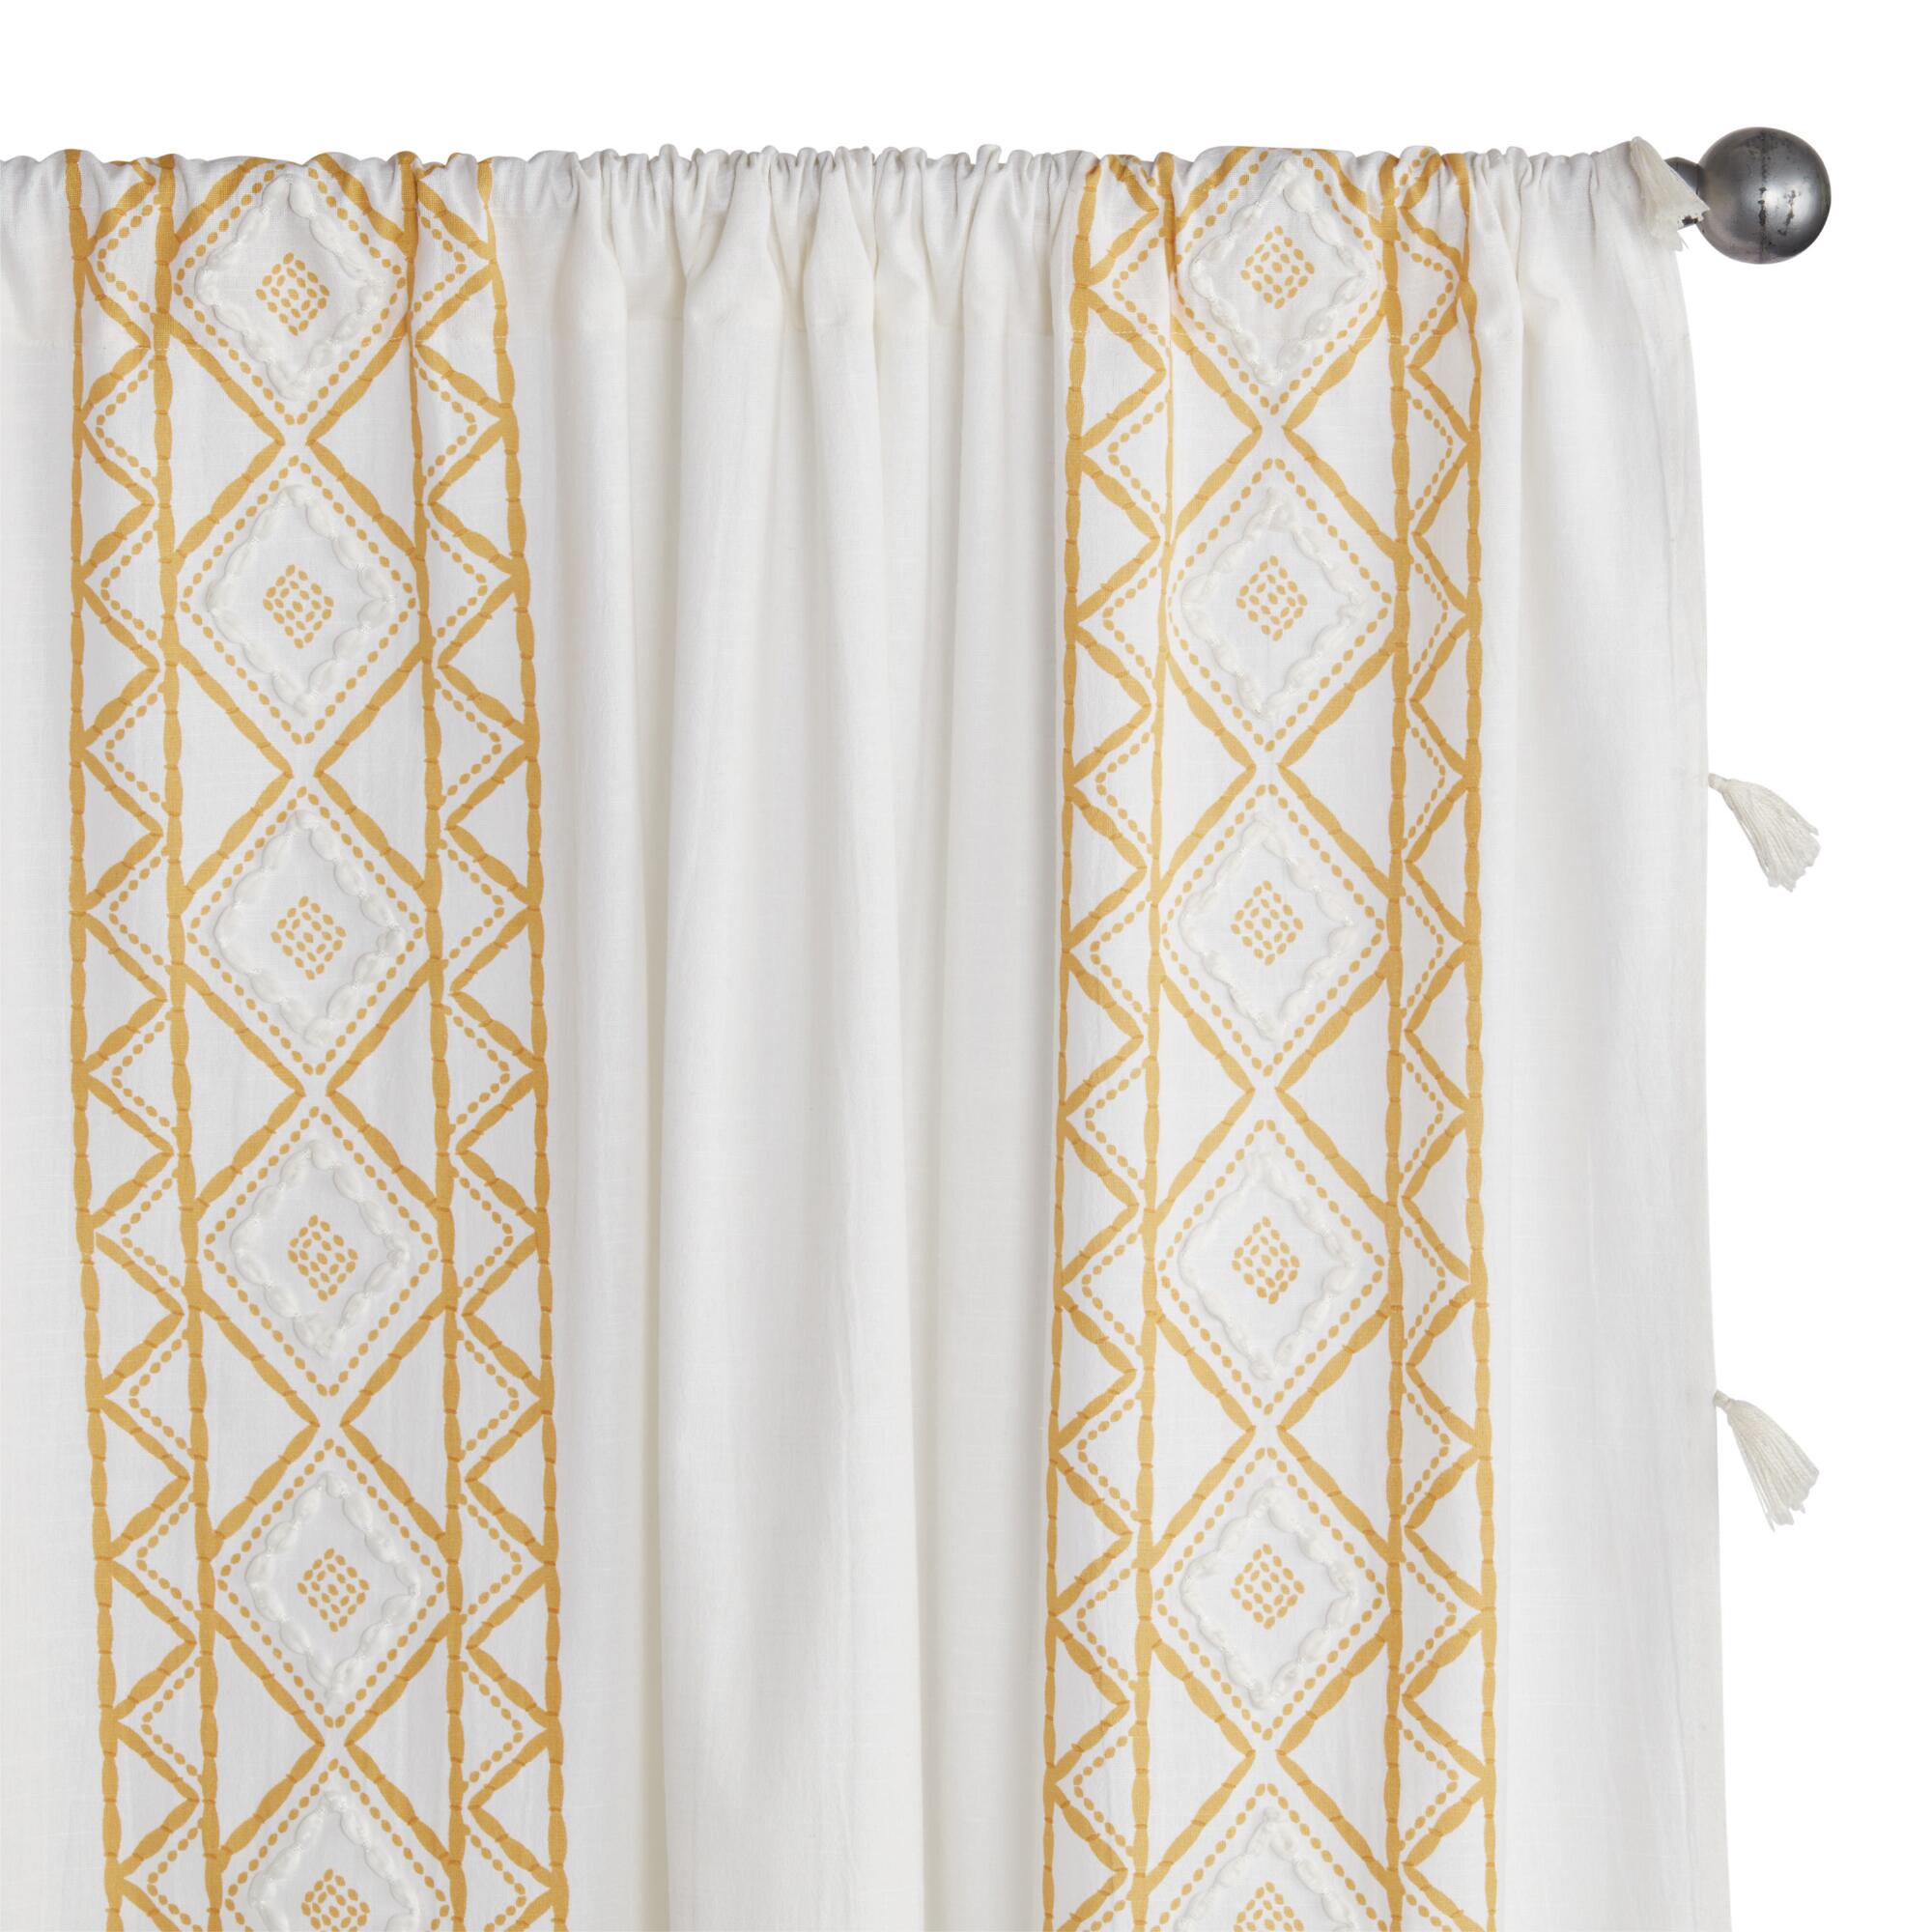 White And Yellow Geo Cotton Sleeve Top Curtains Set of 2: White/Yellow - 84" L by World Market